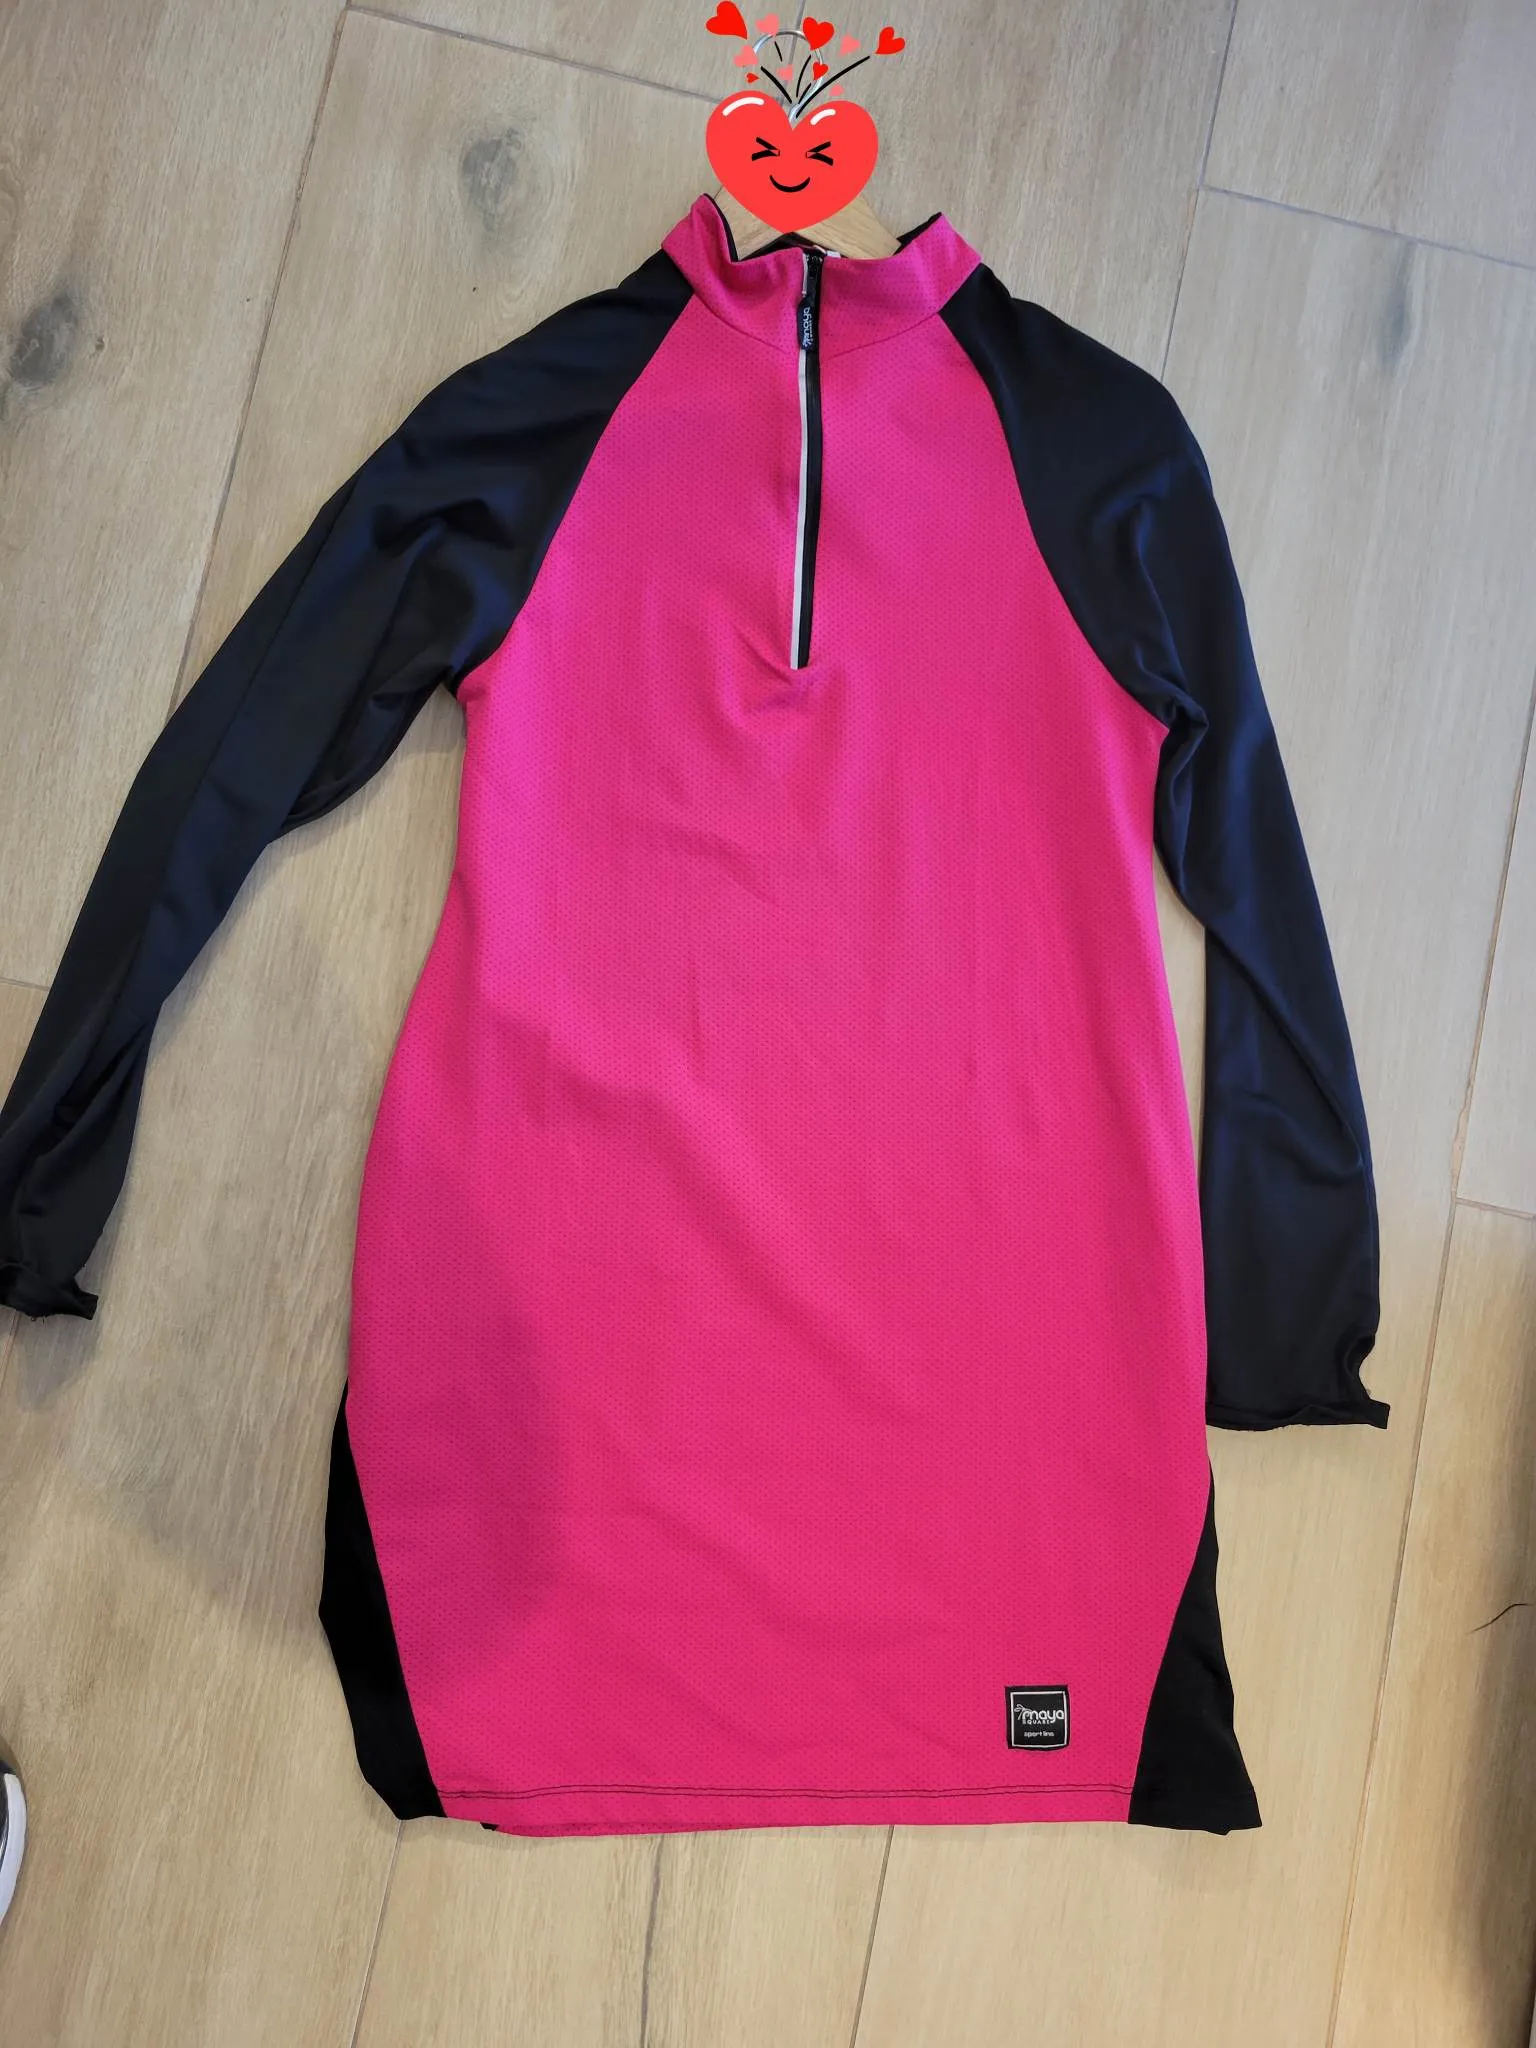 Intensity Sports Sweater - Pink photo review